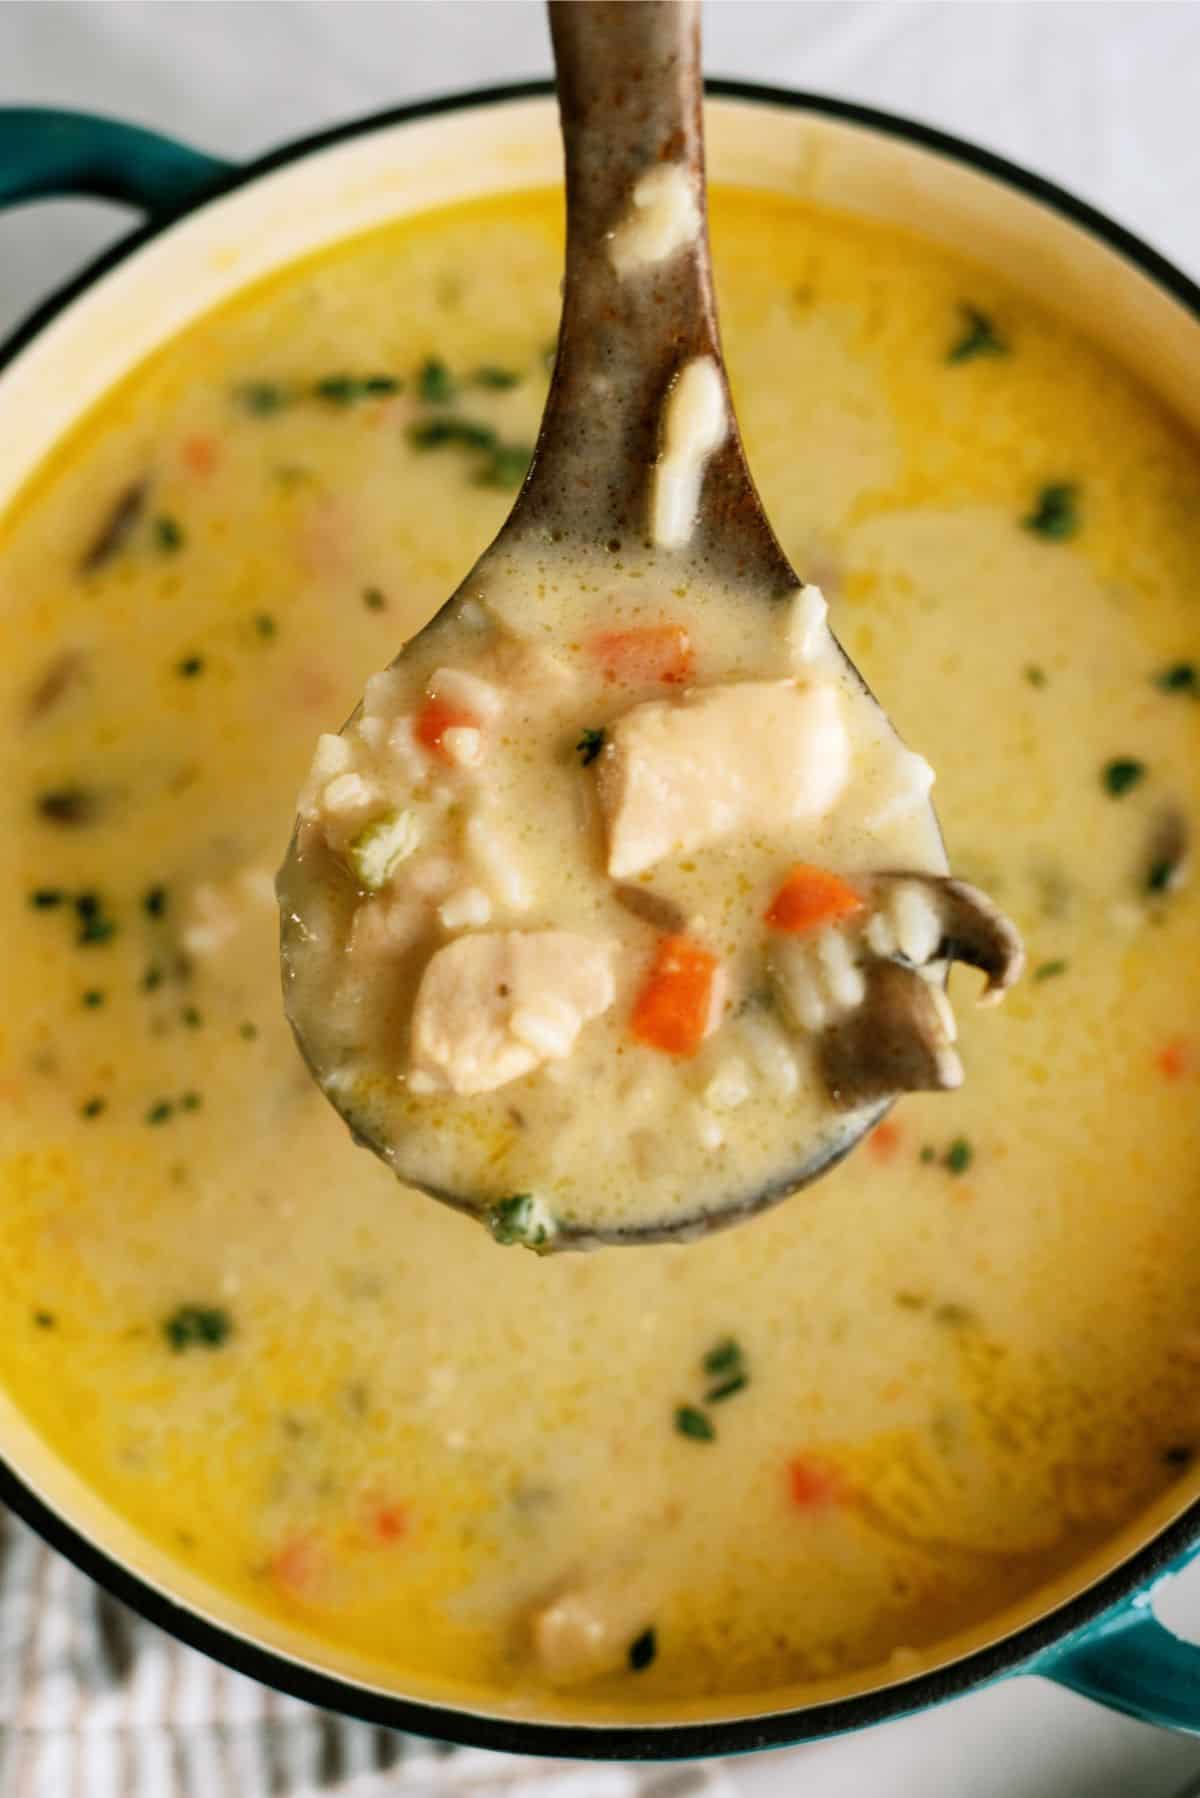 https://www.sixsistersstuff.com/wp-content/uploads/2022/11/Creamy-Chicken-and-Wild-Rice-Soup-Recipe-2.jpg